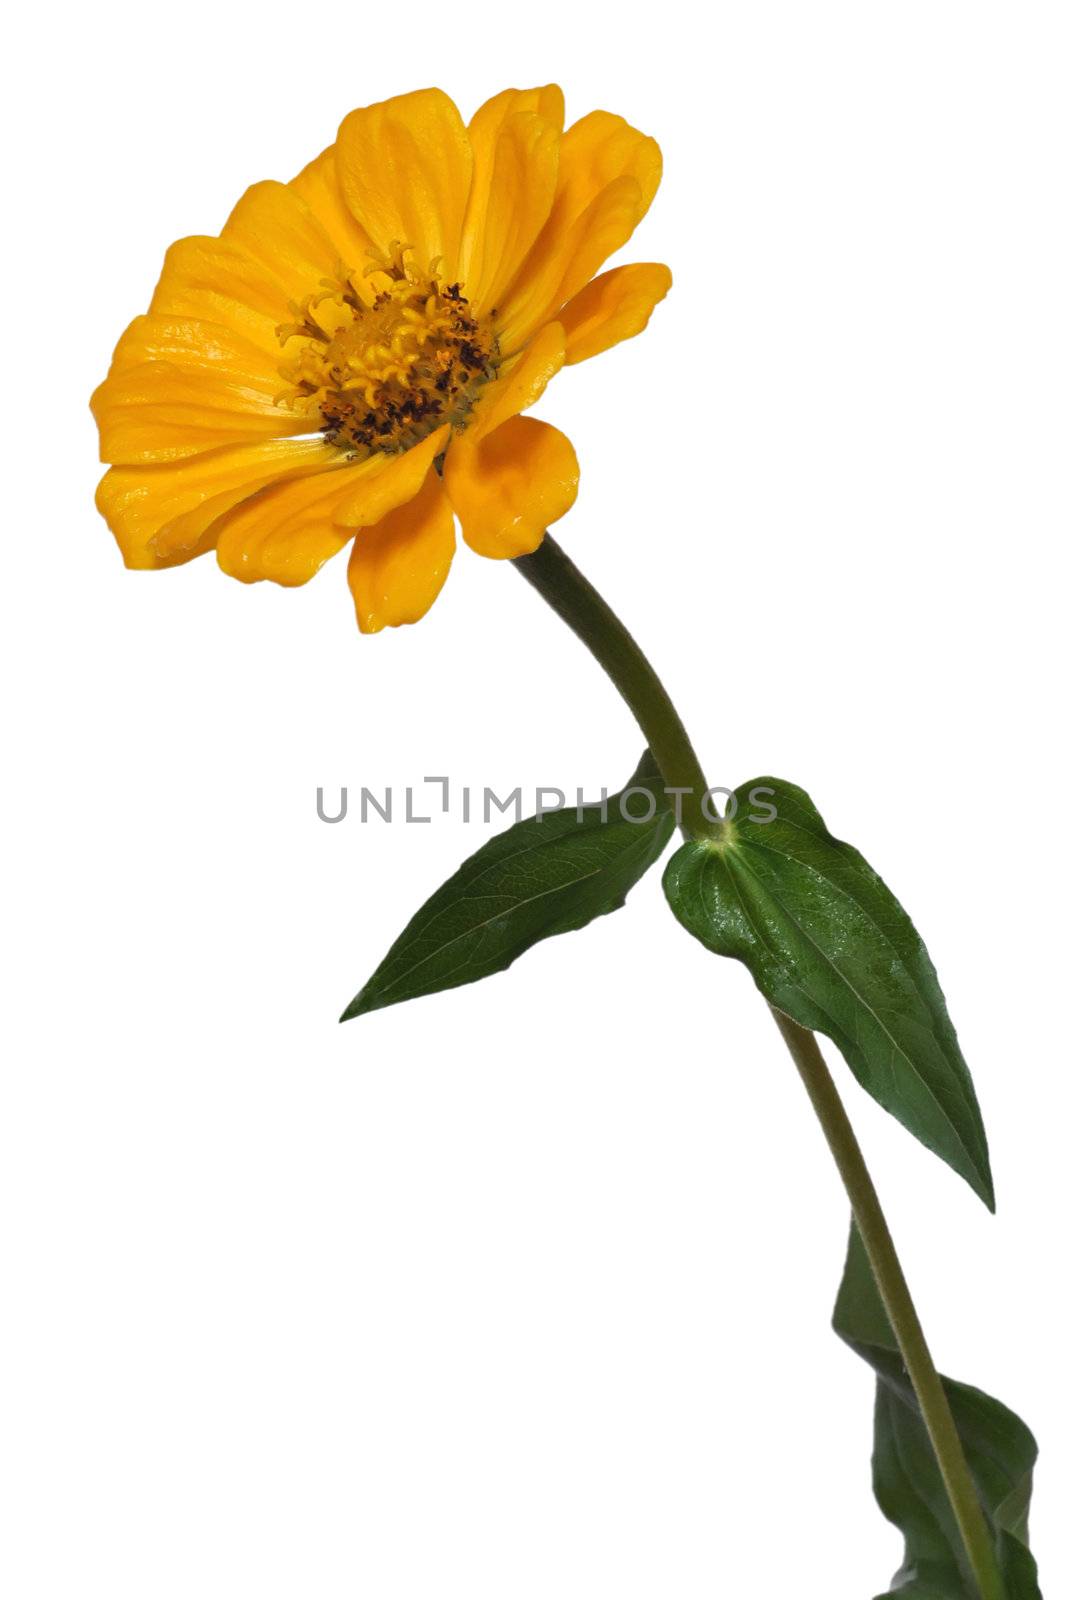 Flower Zinnia with green leaves, isolated on white background